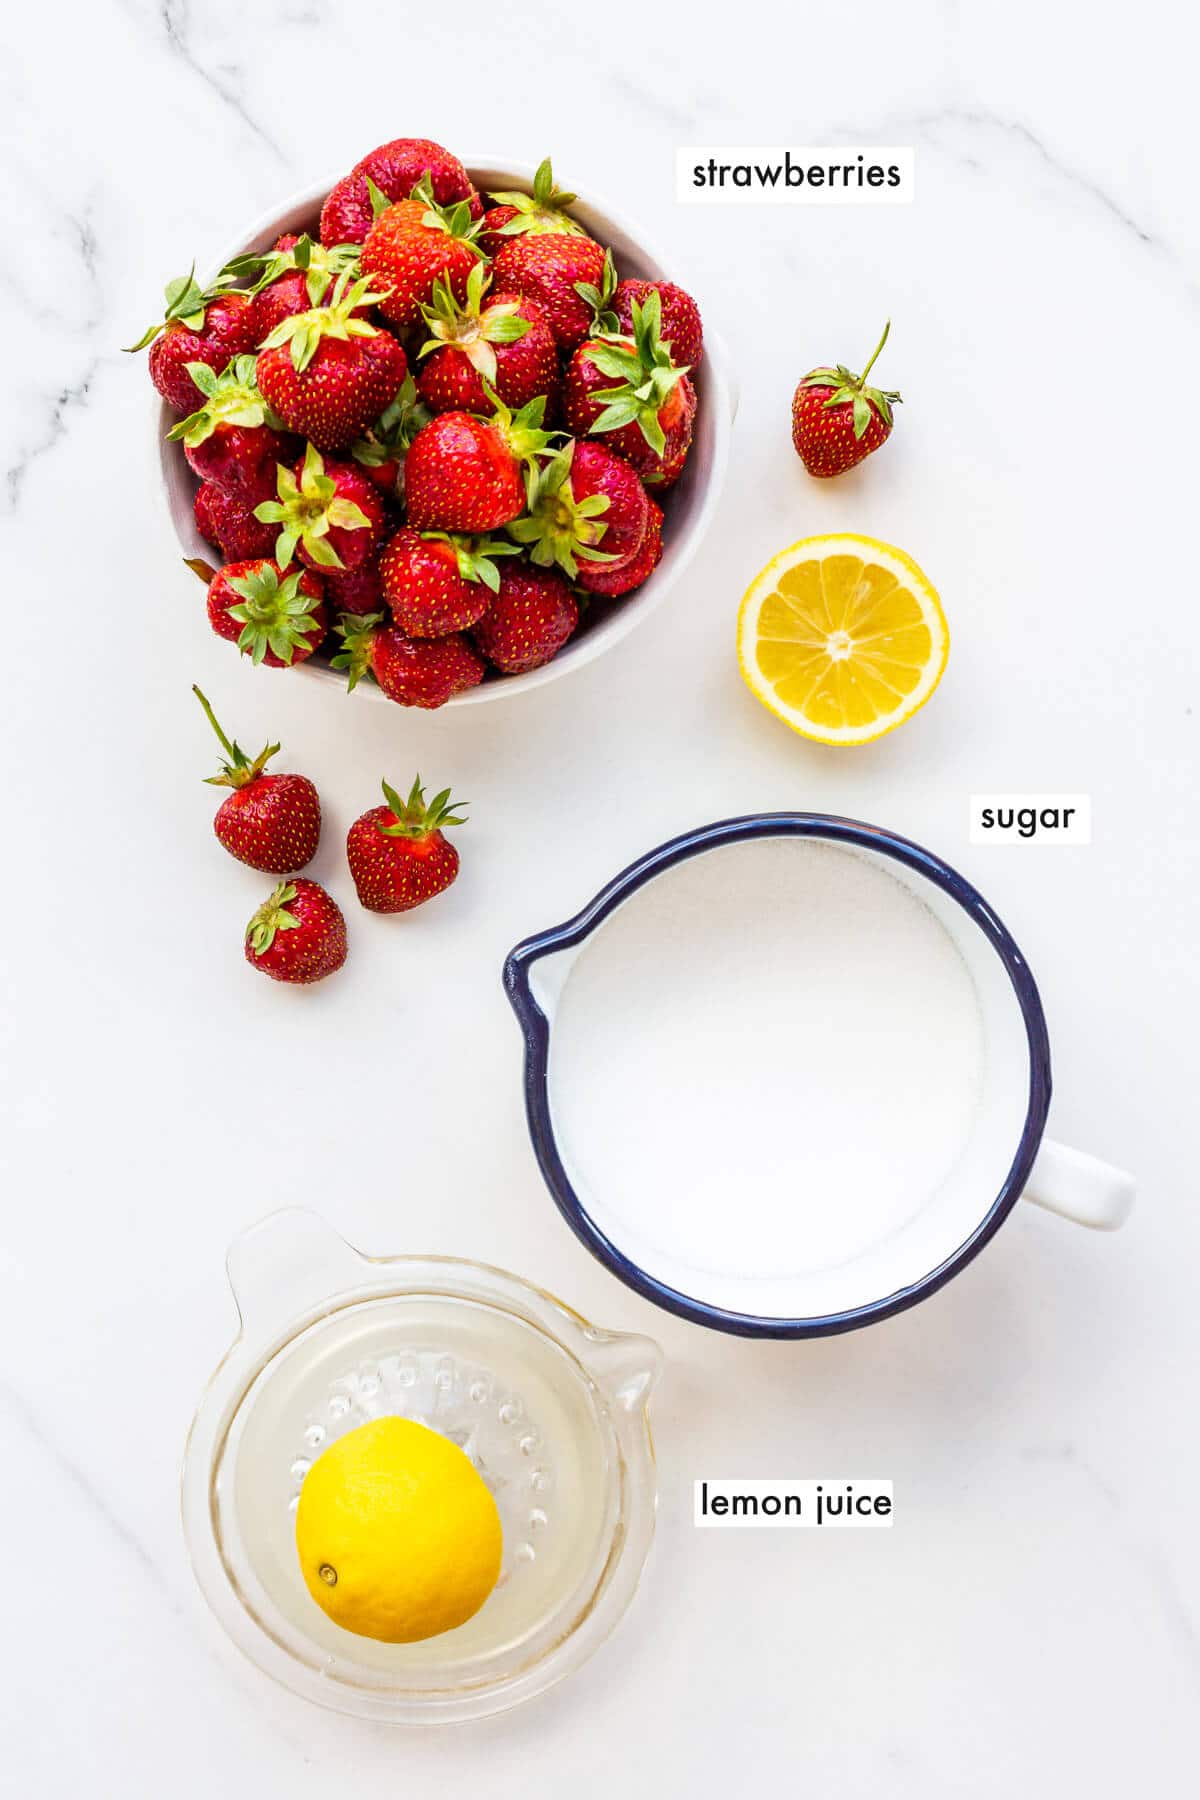 The three ingredients you need to make easy homemade strawberry jam: strawberries, sugar, and lemon juice.